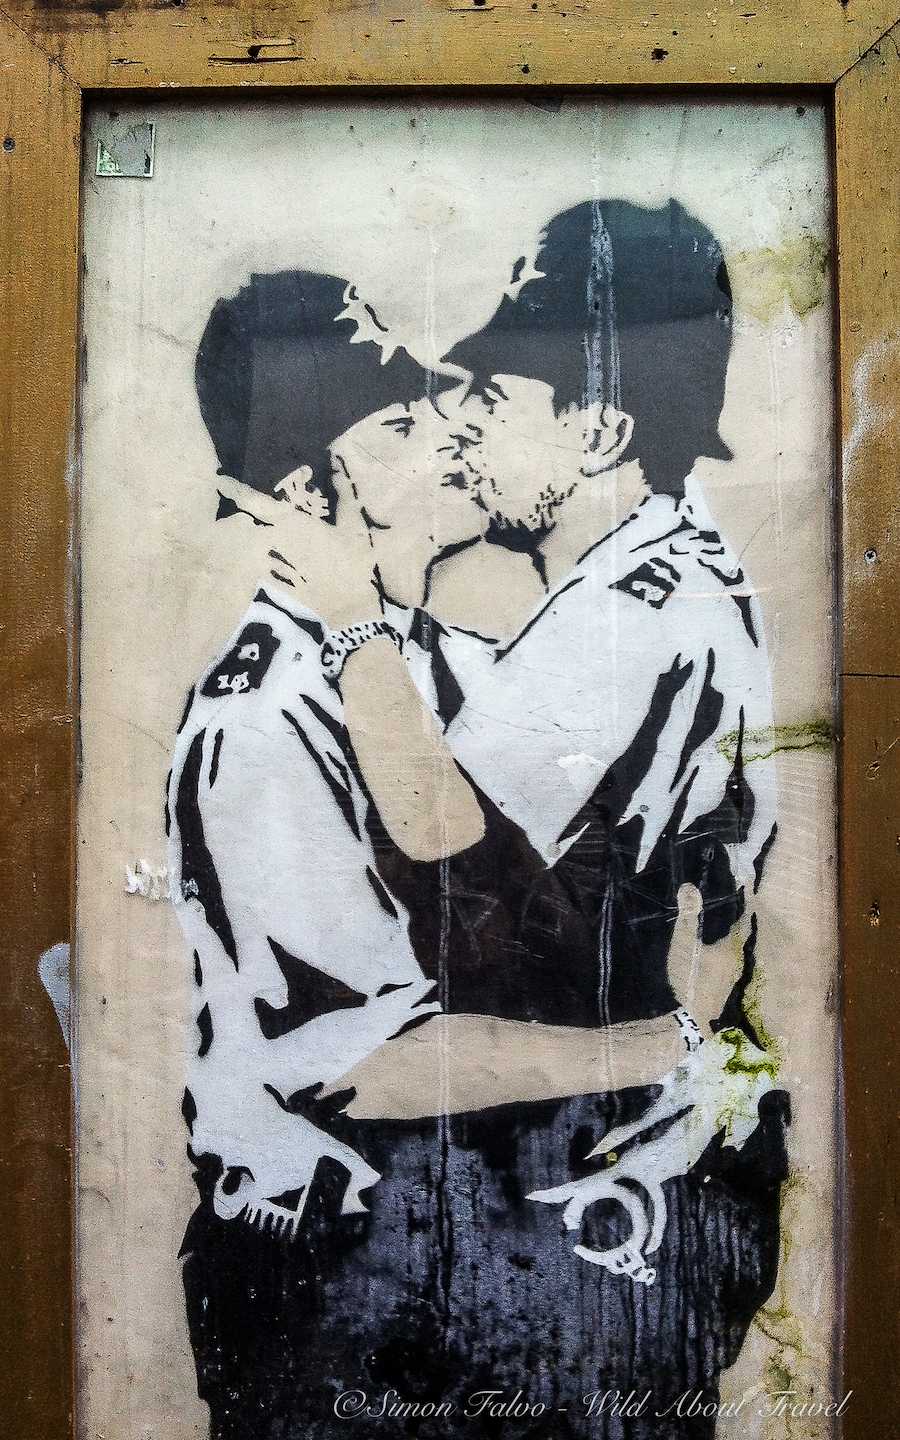 Banksy Kissing Coppers